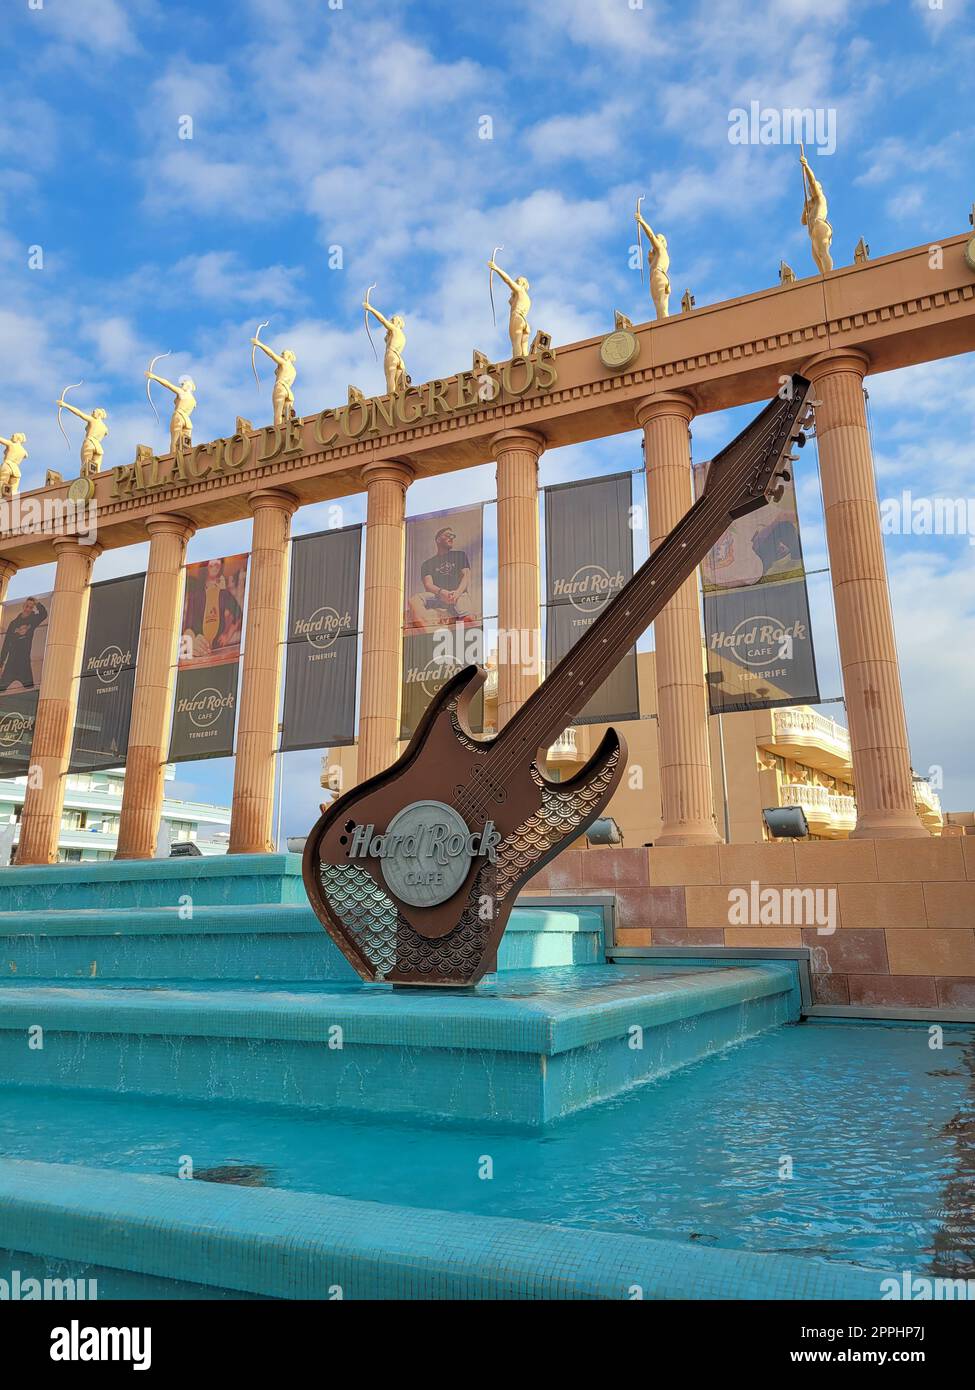 Hard Rock Cafe, Playa de la Americas, Tenerife, Spain August 12, 2022 - Building exterior with guitar , fountain and some archers Stock Photo